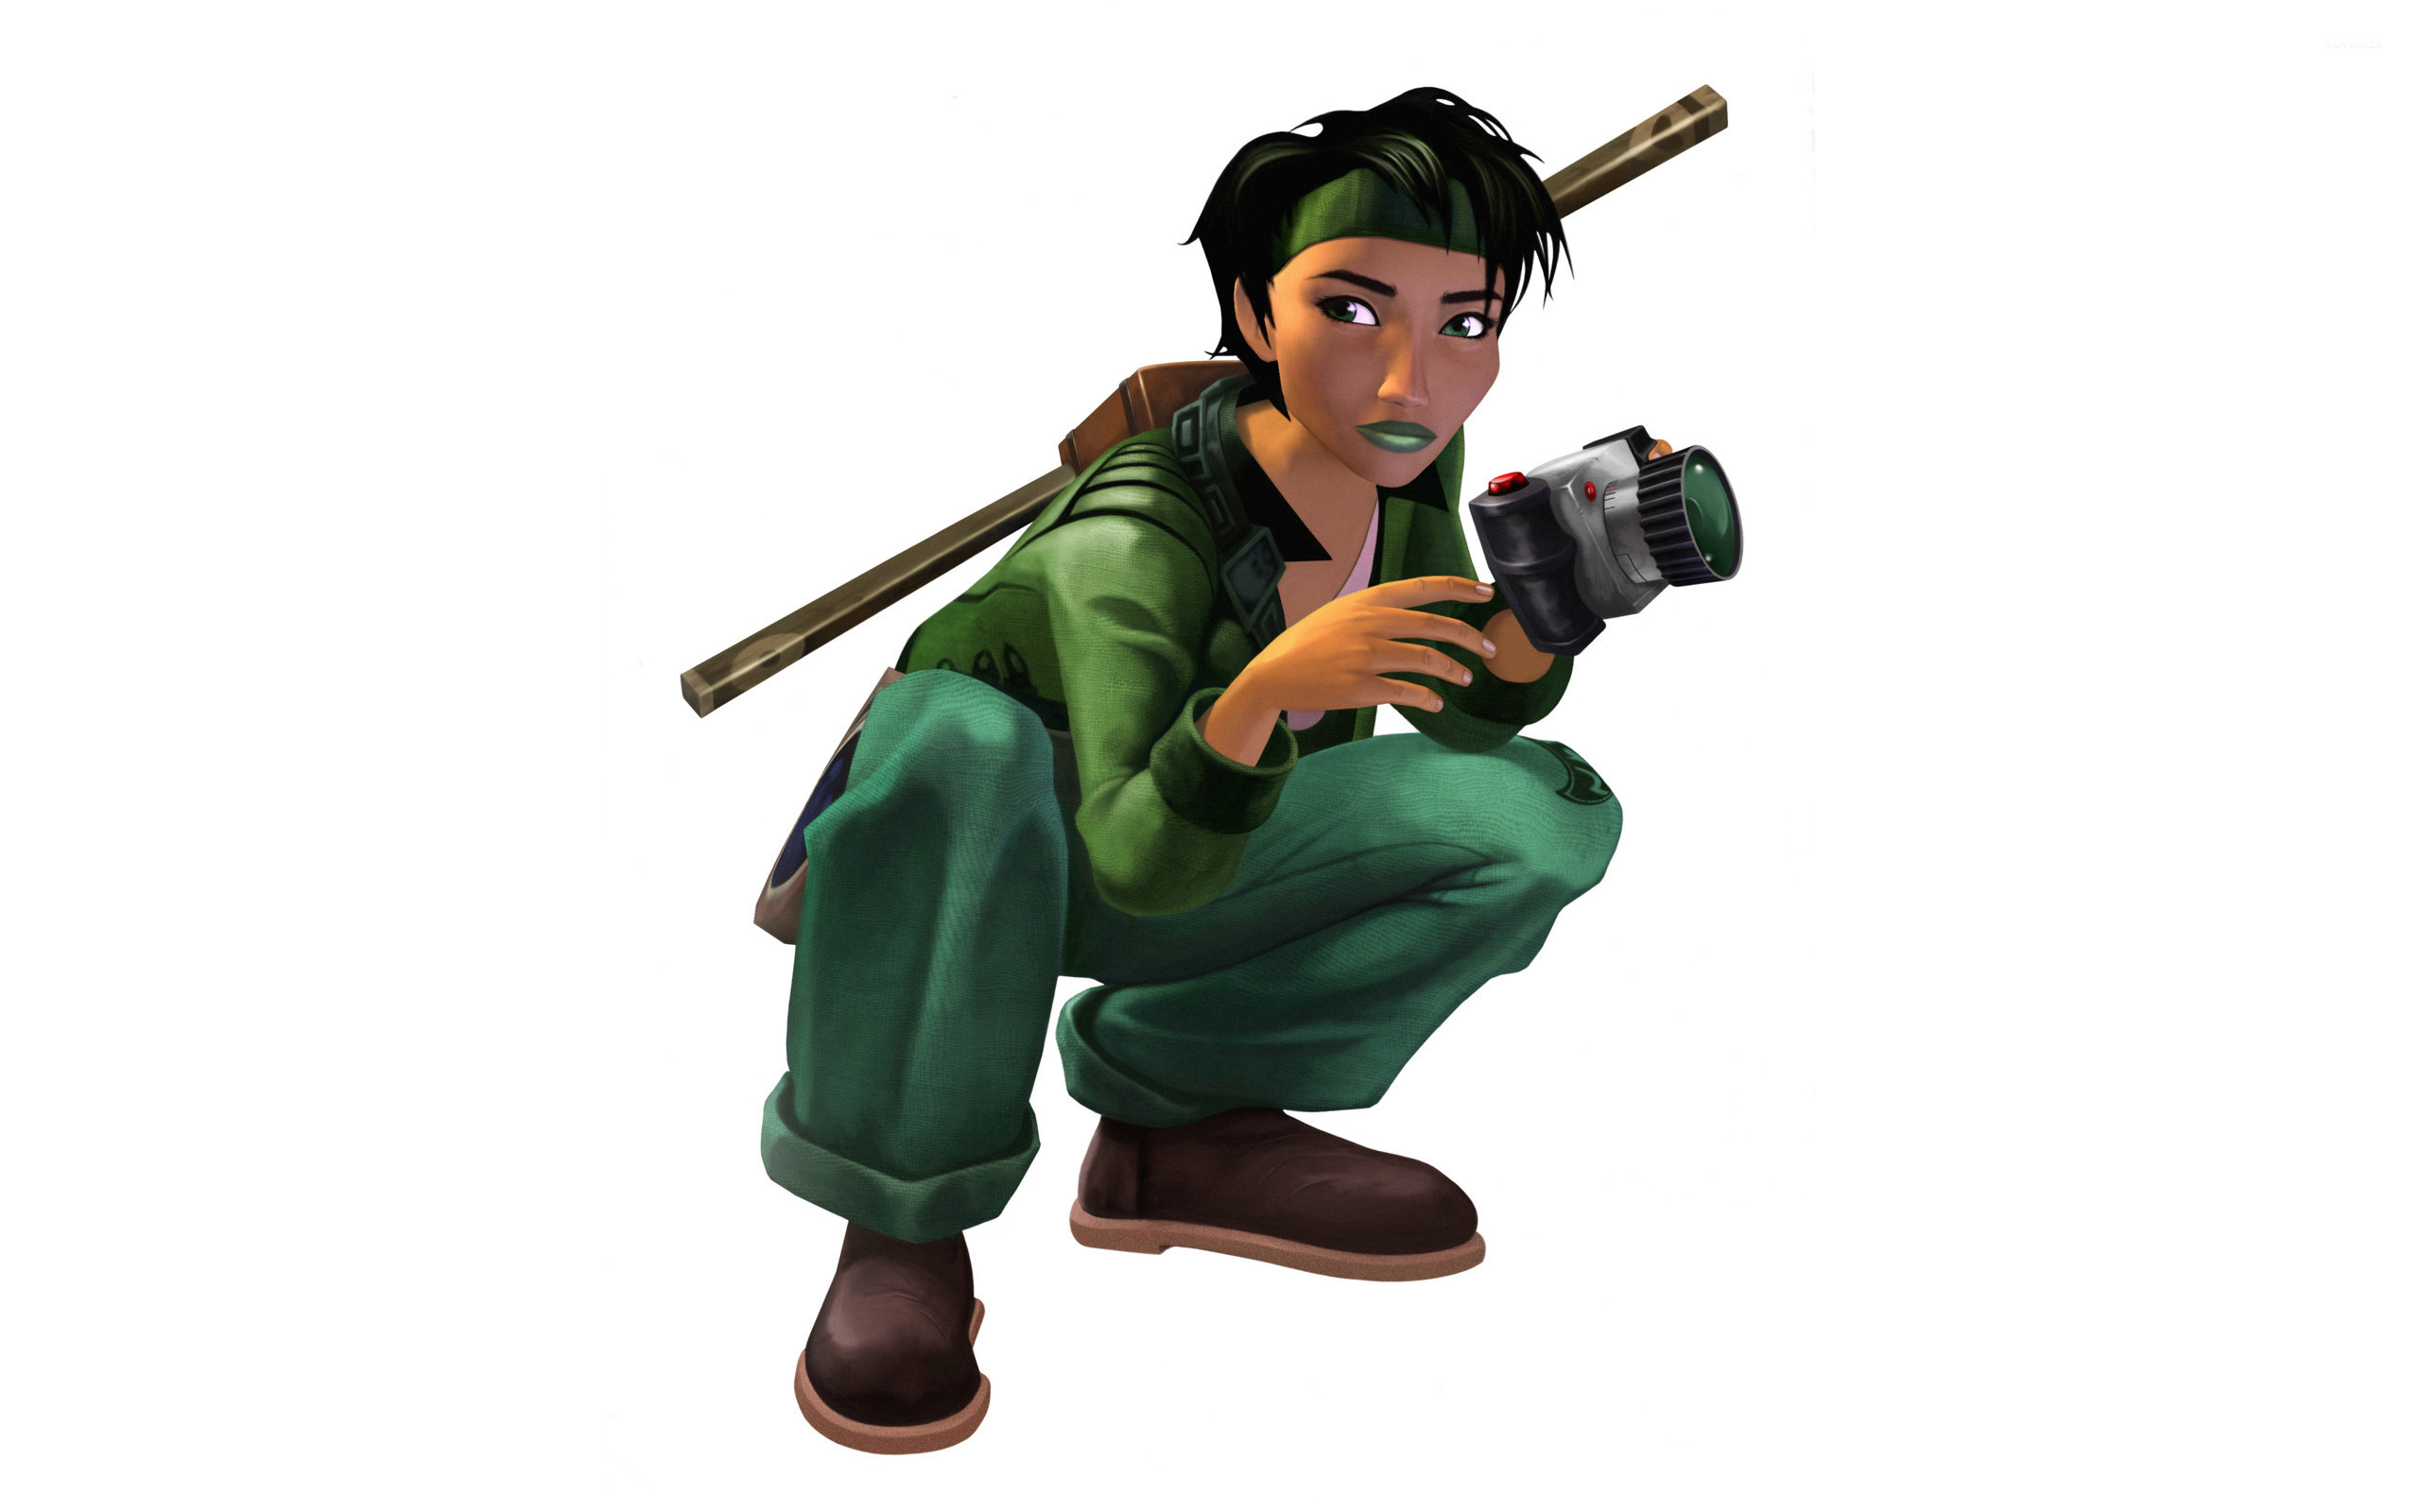 Beyond Good and Evil (Game): Jade, A photo-journalist, A game character by Ubisoft developer Michel Ancel. 2560x1600 HD Wallpaper.